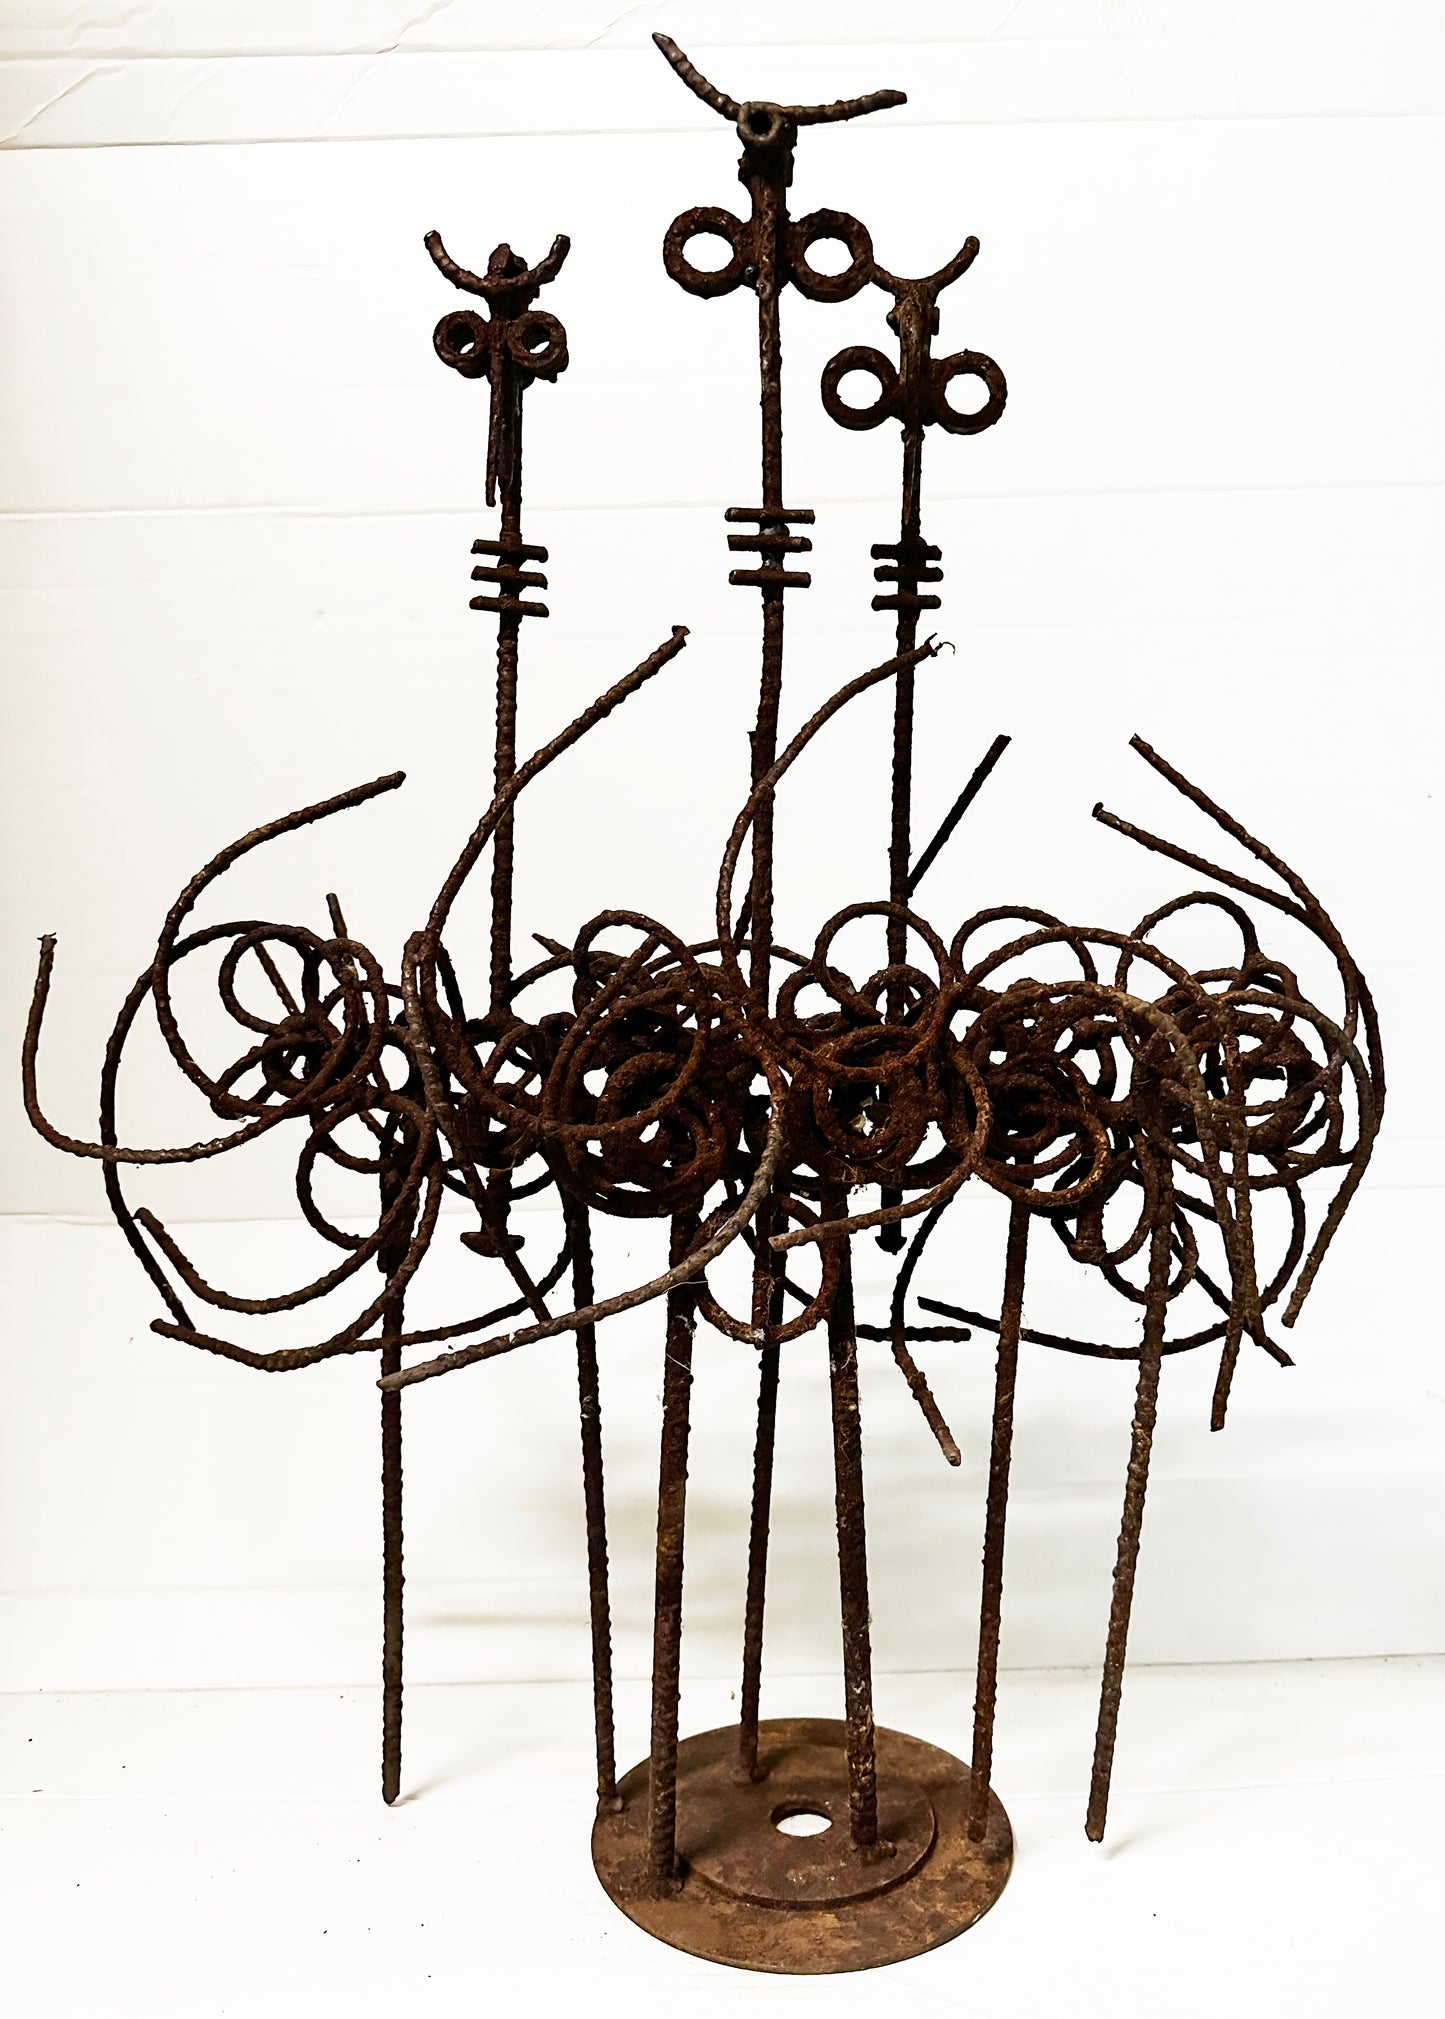 Mid-century Abstract Rebar Surrealist Style Sculpture by Franco Garelli